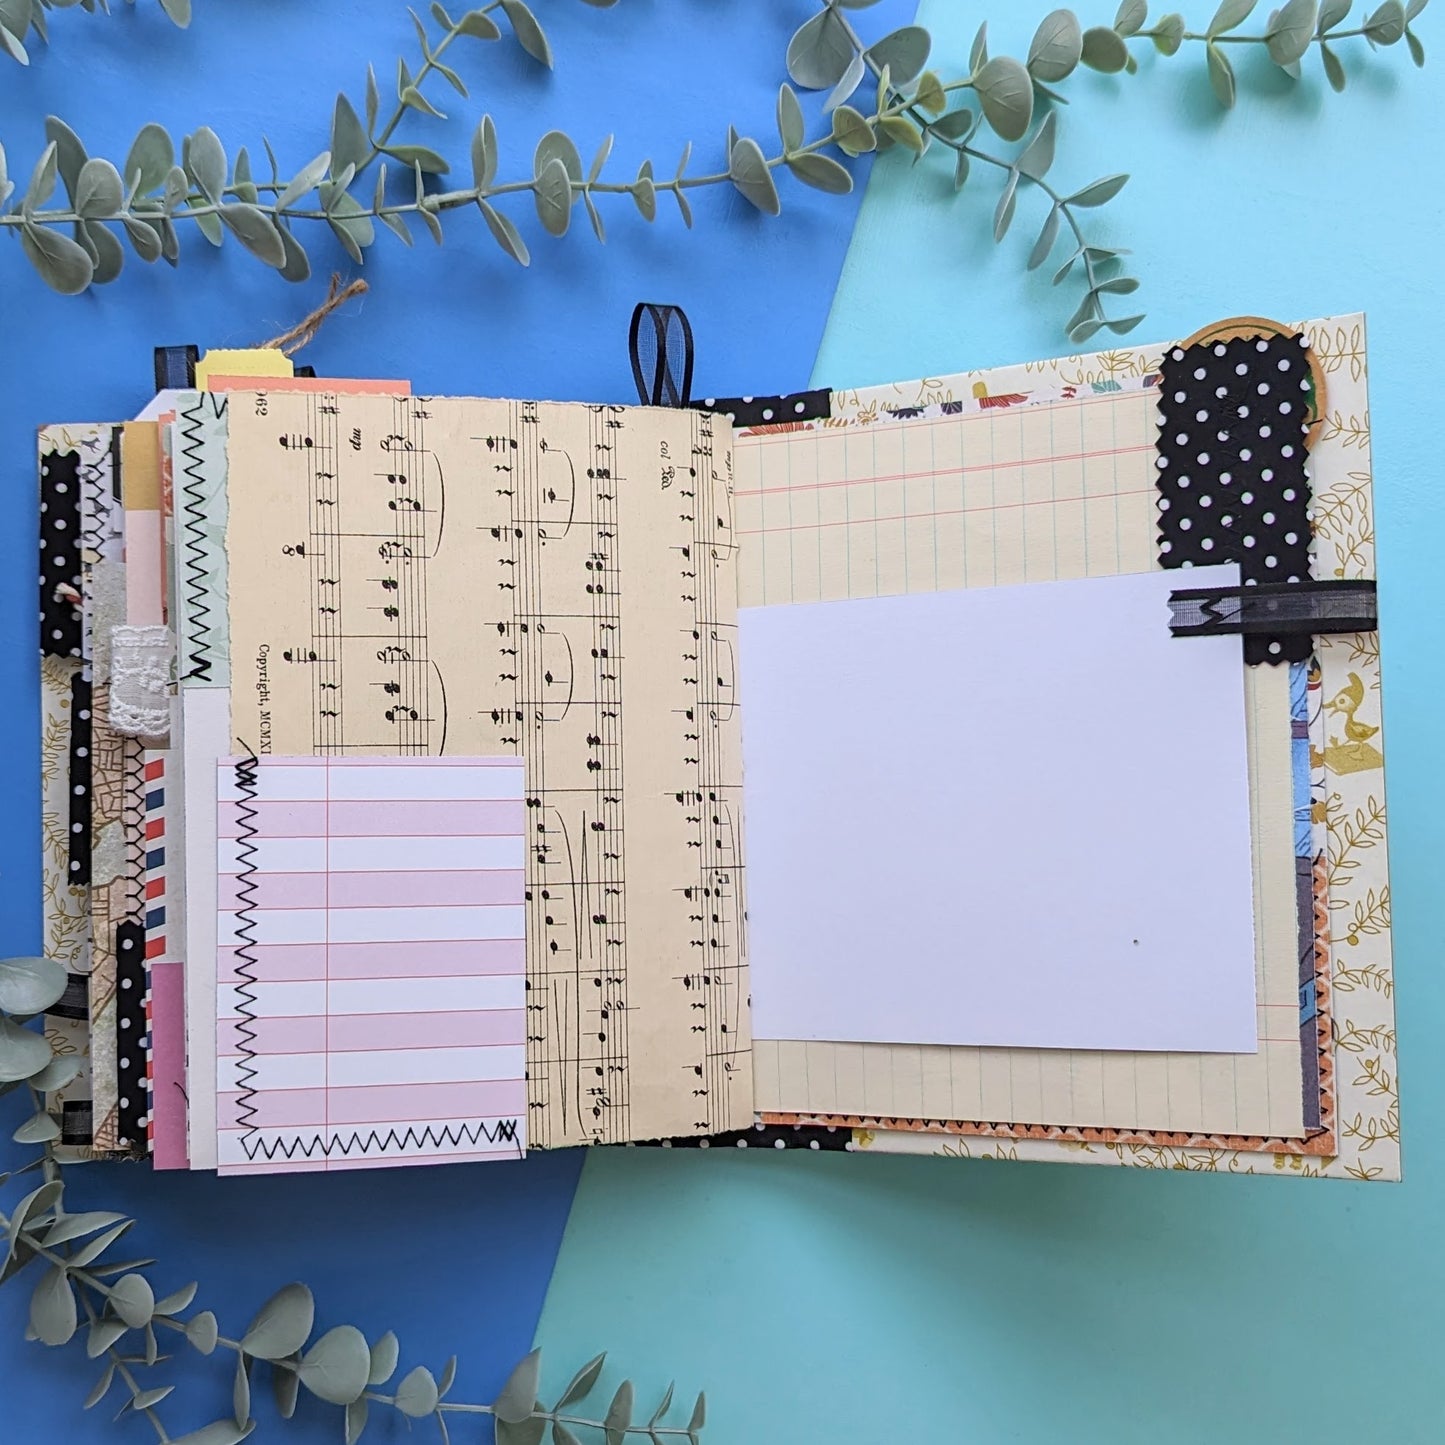 Handmade Upcycled Journal - 101 Dalmations